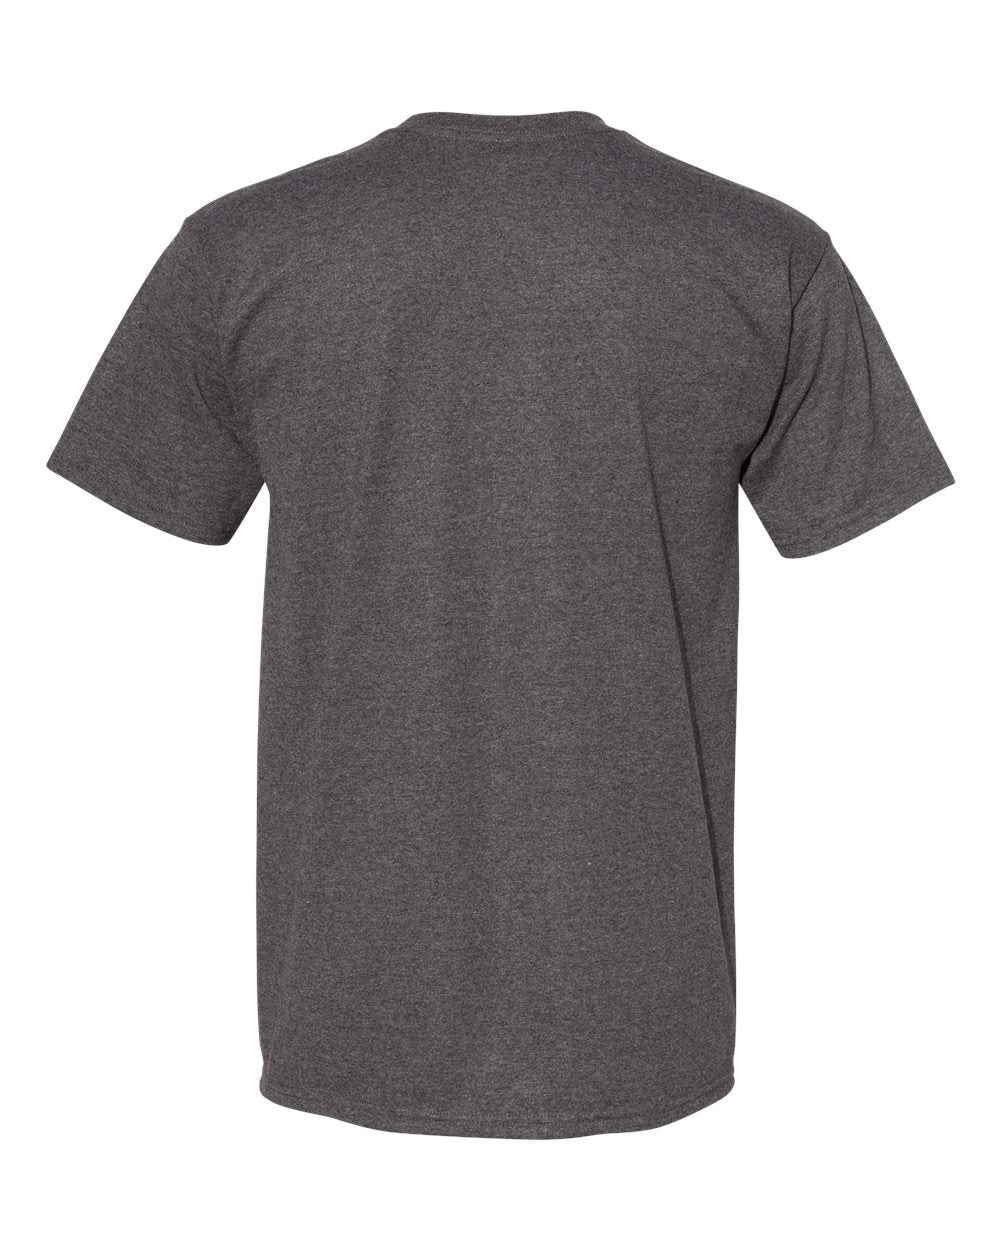 American Apparel Midweight Cotton Unisex Tee 1701 #color_Heather Charcoal